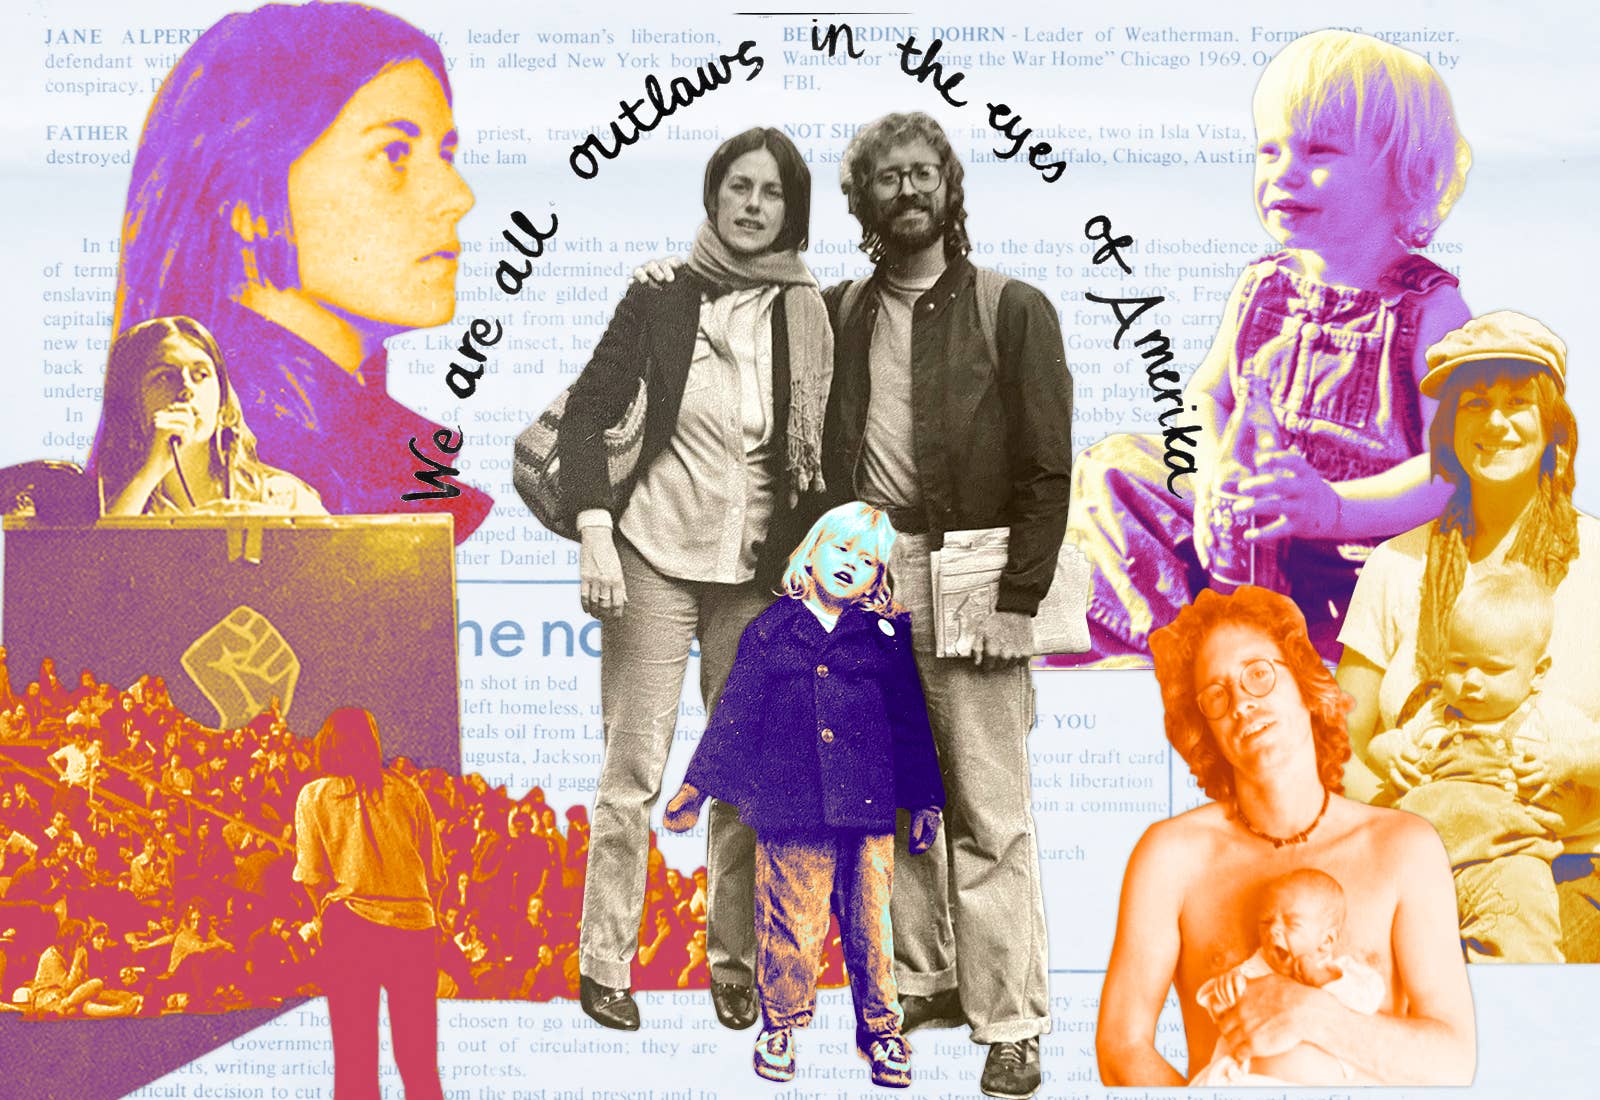 A photo collage in bright purples, yellows, and oranges showing the Dohrn family in the center, Bernardine Dohrn during her activism on th left, and baby pictures on the right